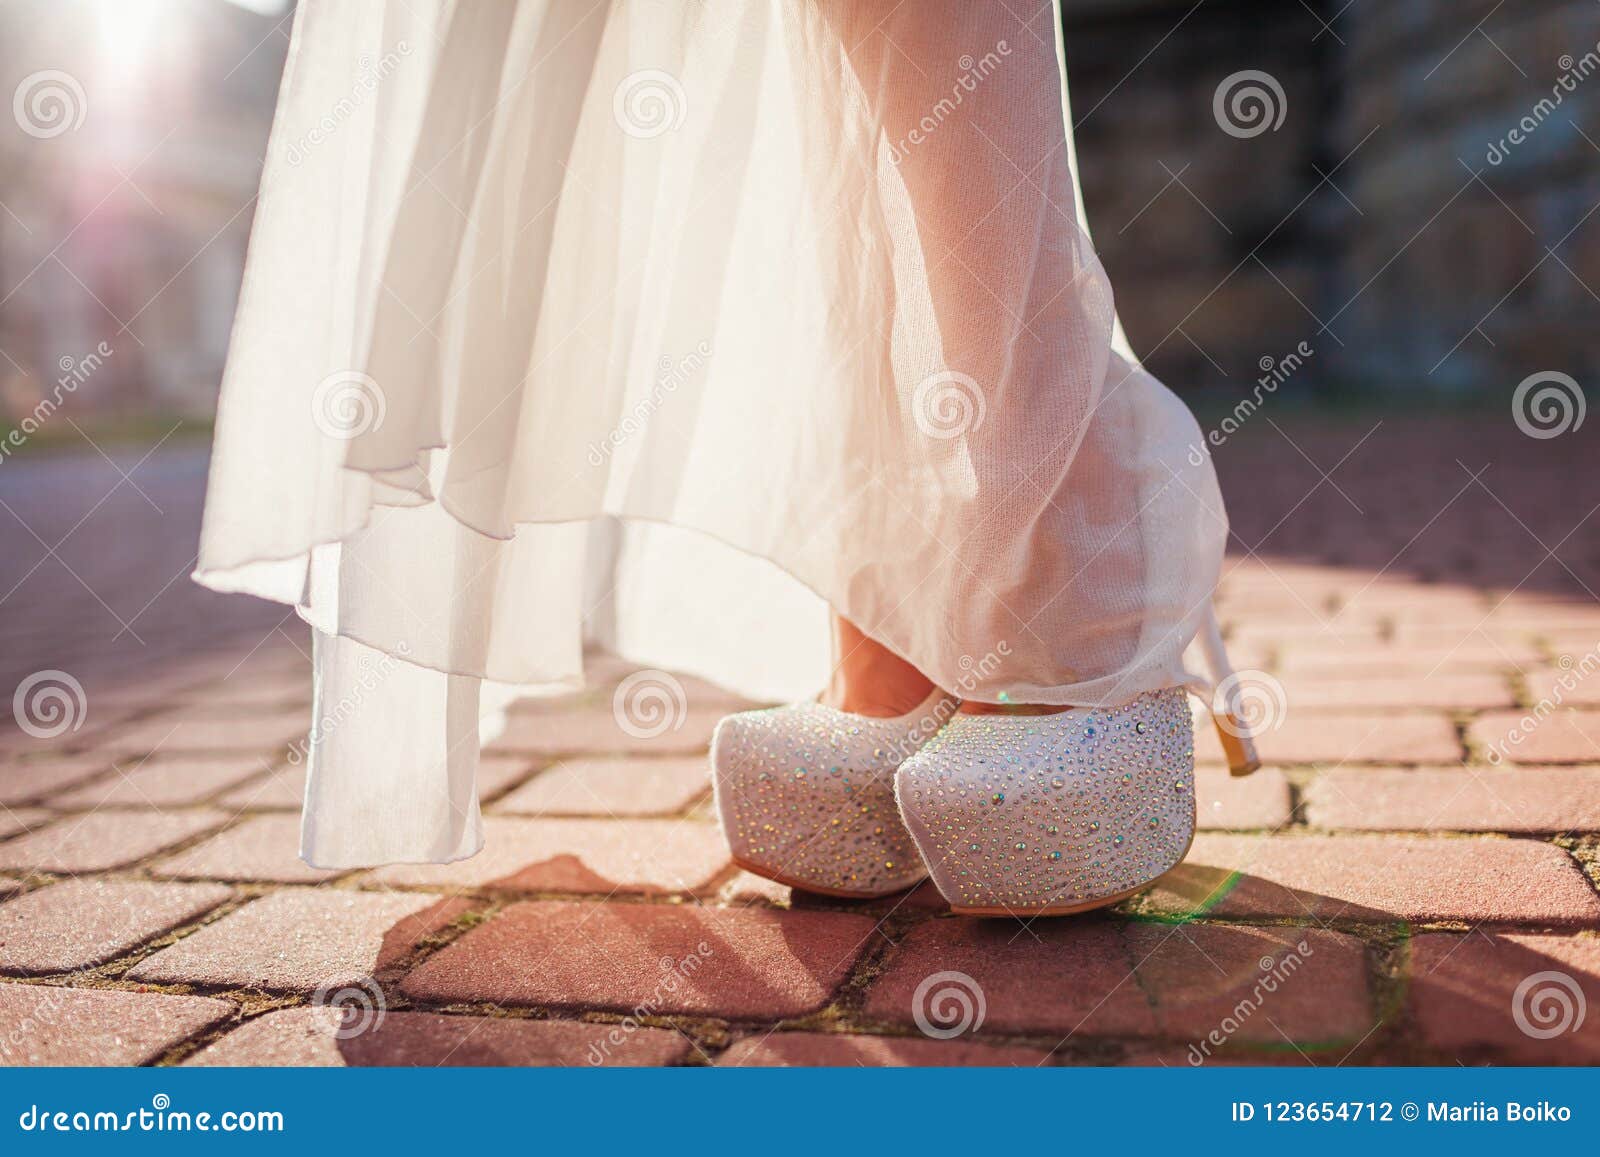 Stylish Woman Wearing High Heeled Shoes and White Dress Outdoors ...